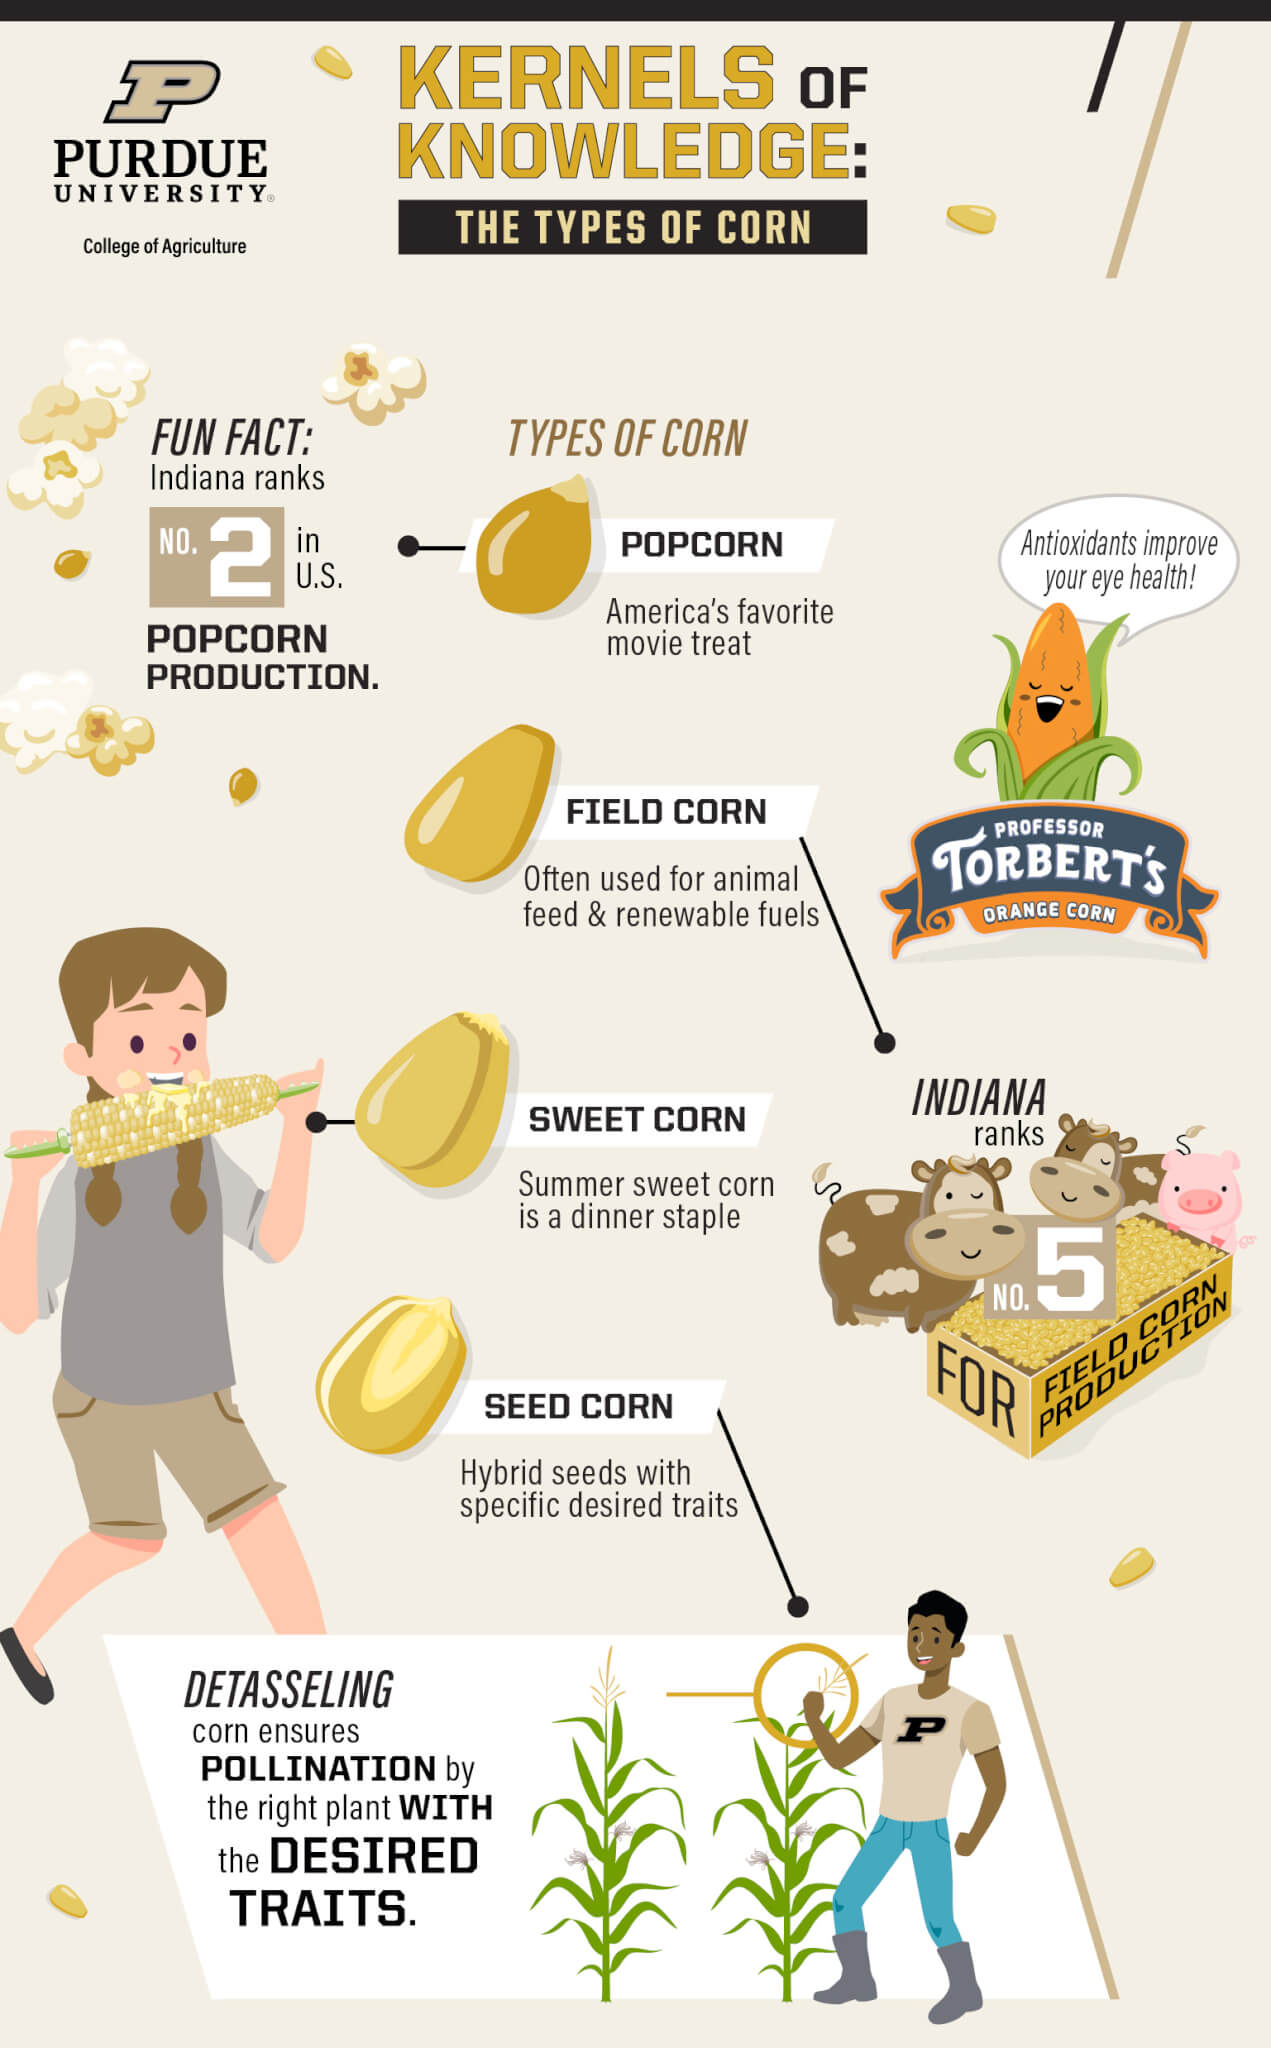 kernels of knowledge: the types of corn infographic